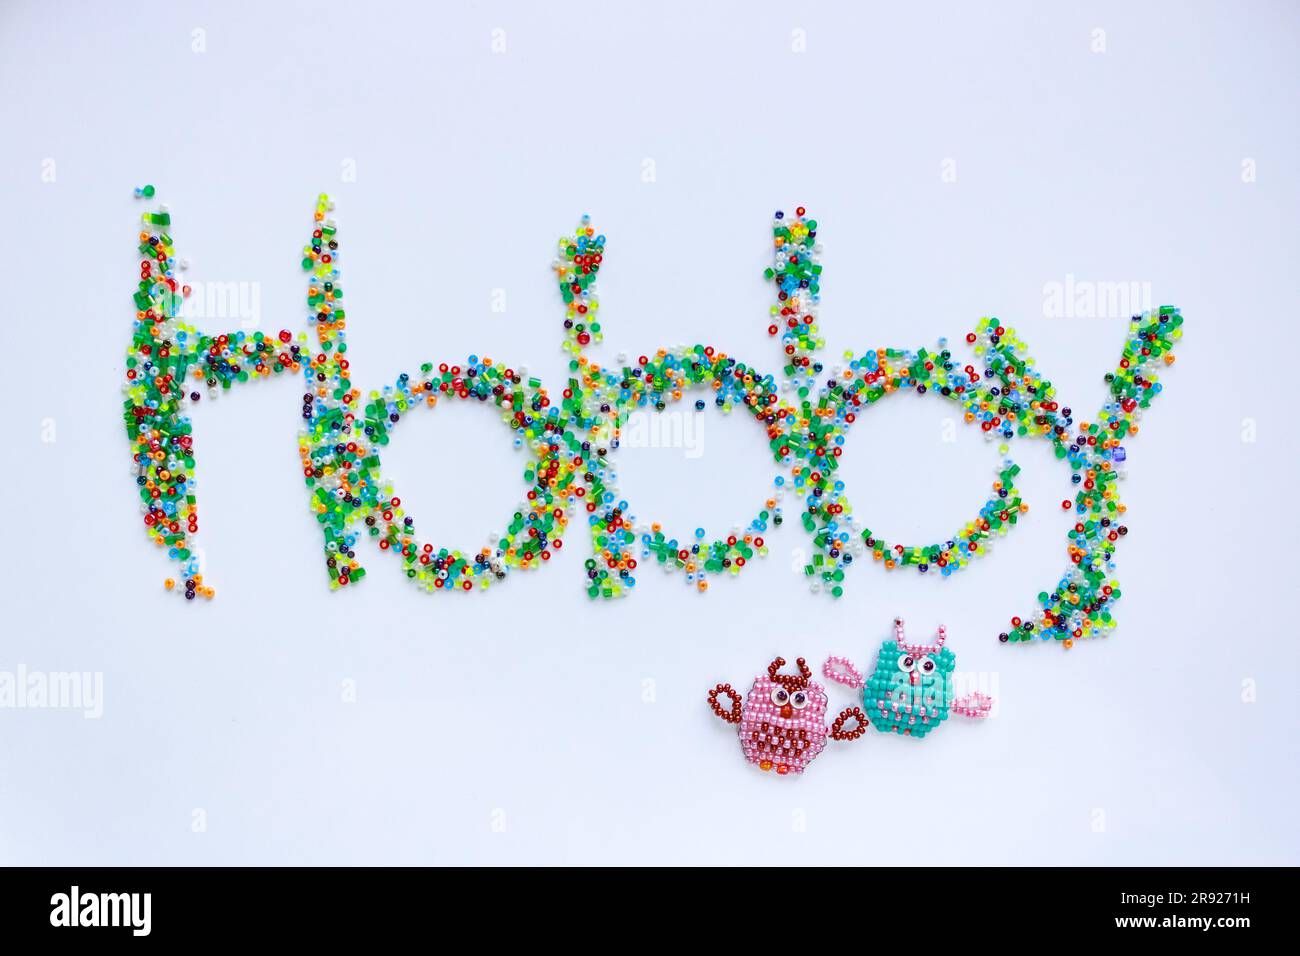 The word Hobby written on a white background with multi-colored beads and two figurines of owls made of beads Stock Photo